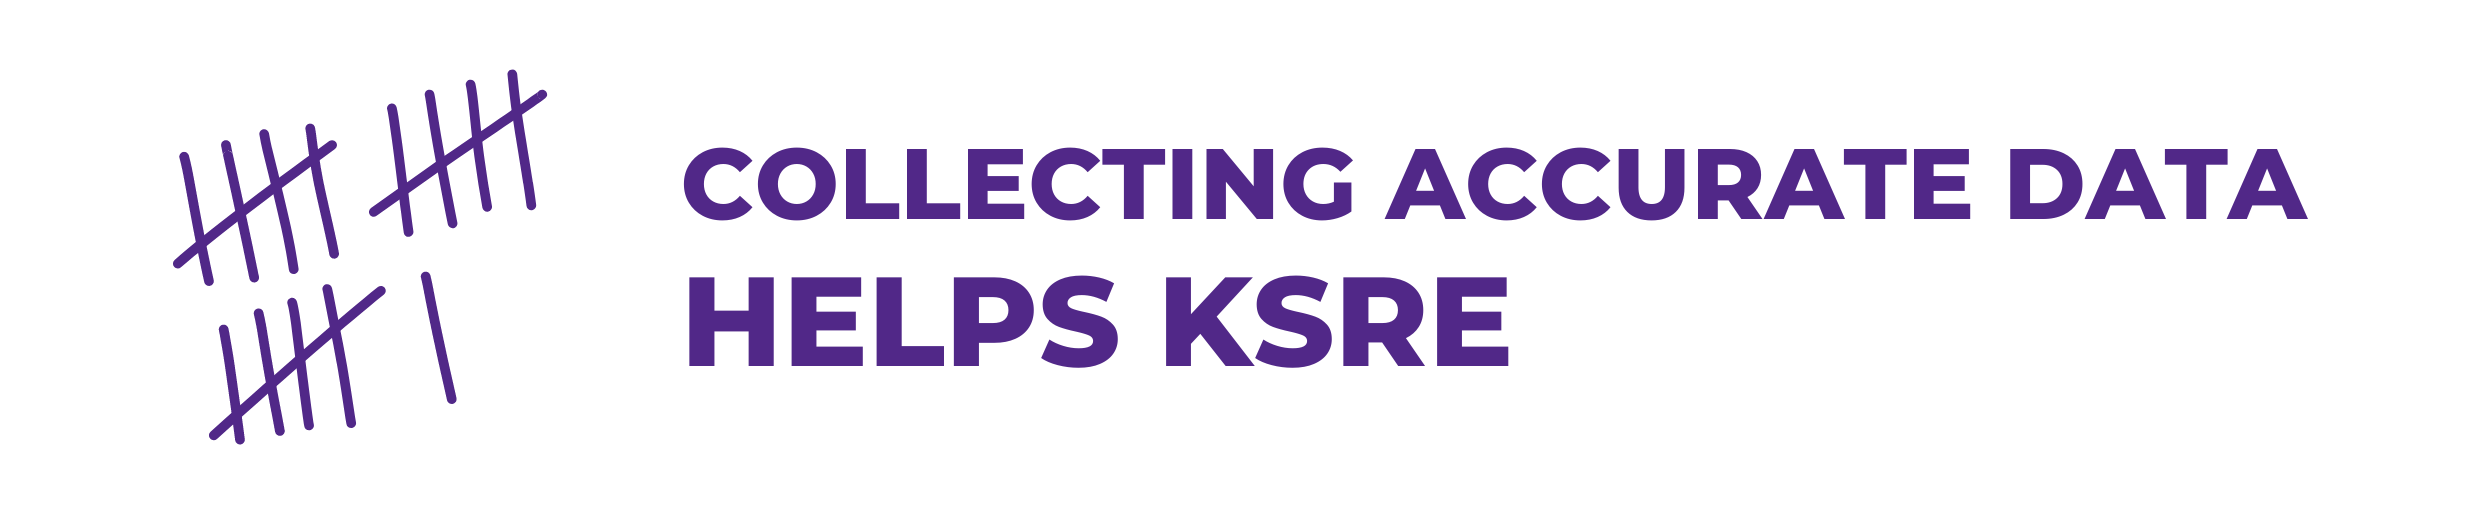 Collecting Accurate Data Helps KSRE